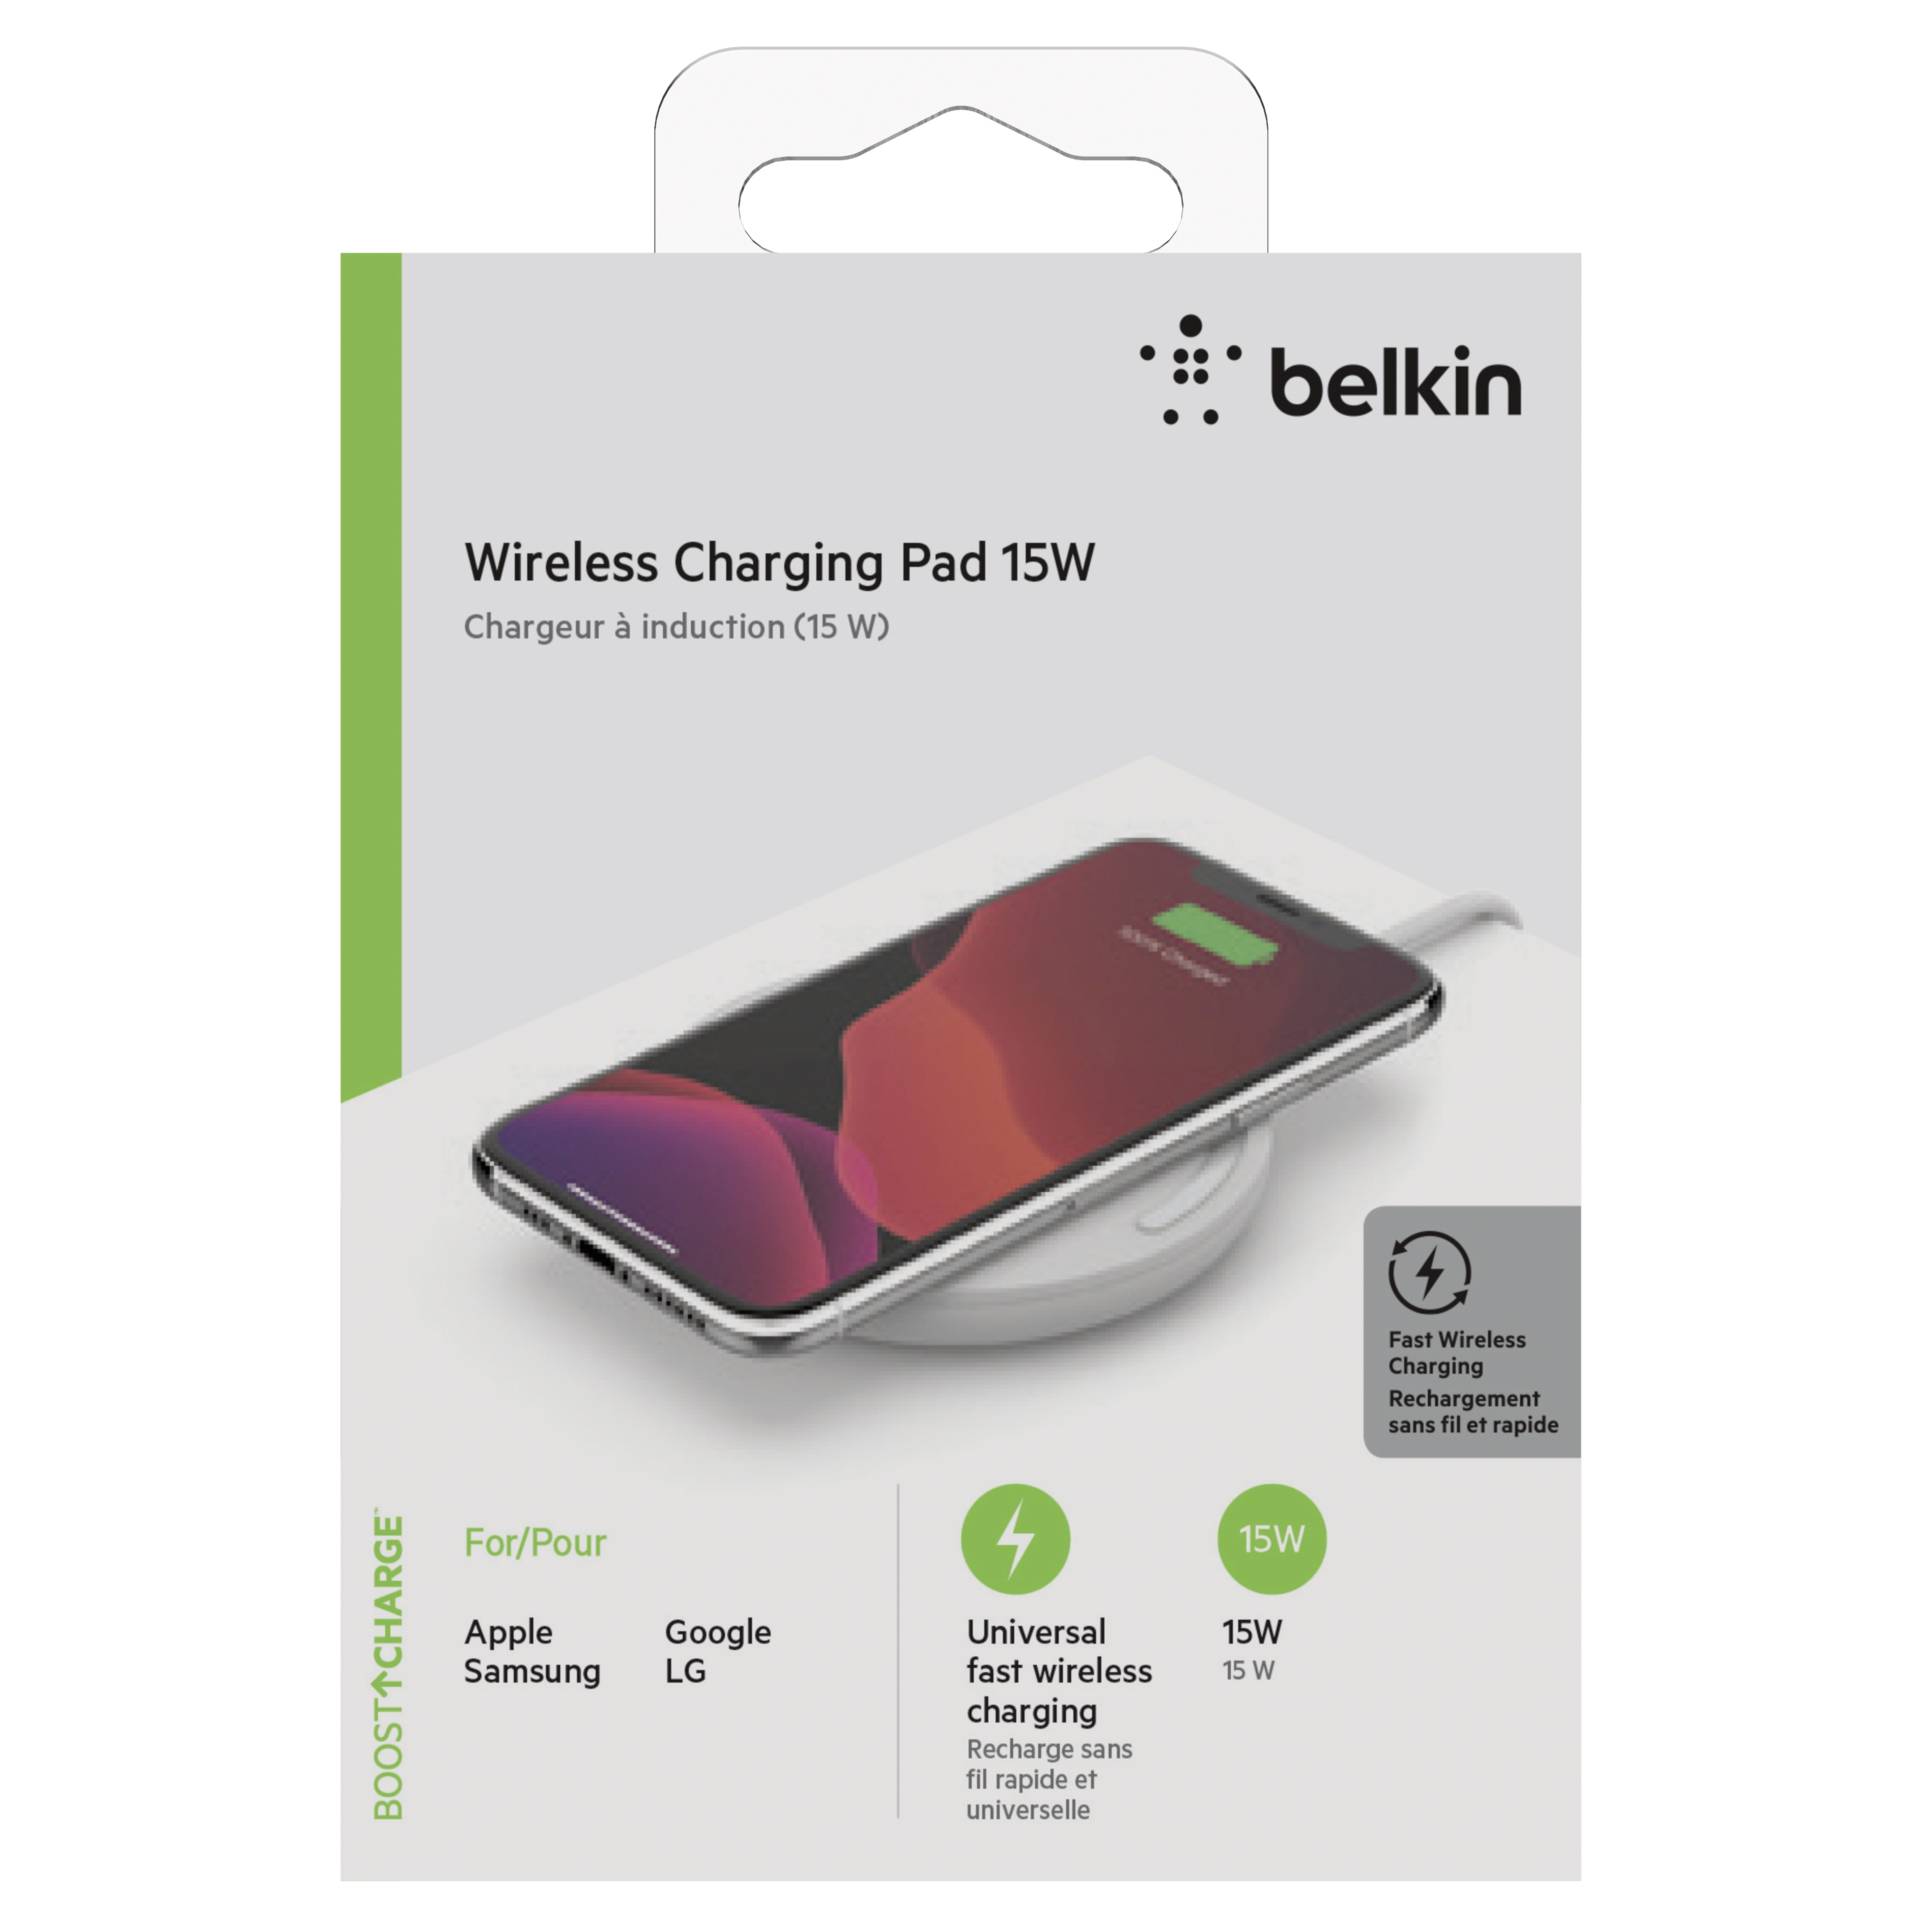 Belkin Wireless Charging Pad 15W USB-C Cable with adaptor wh